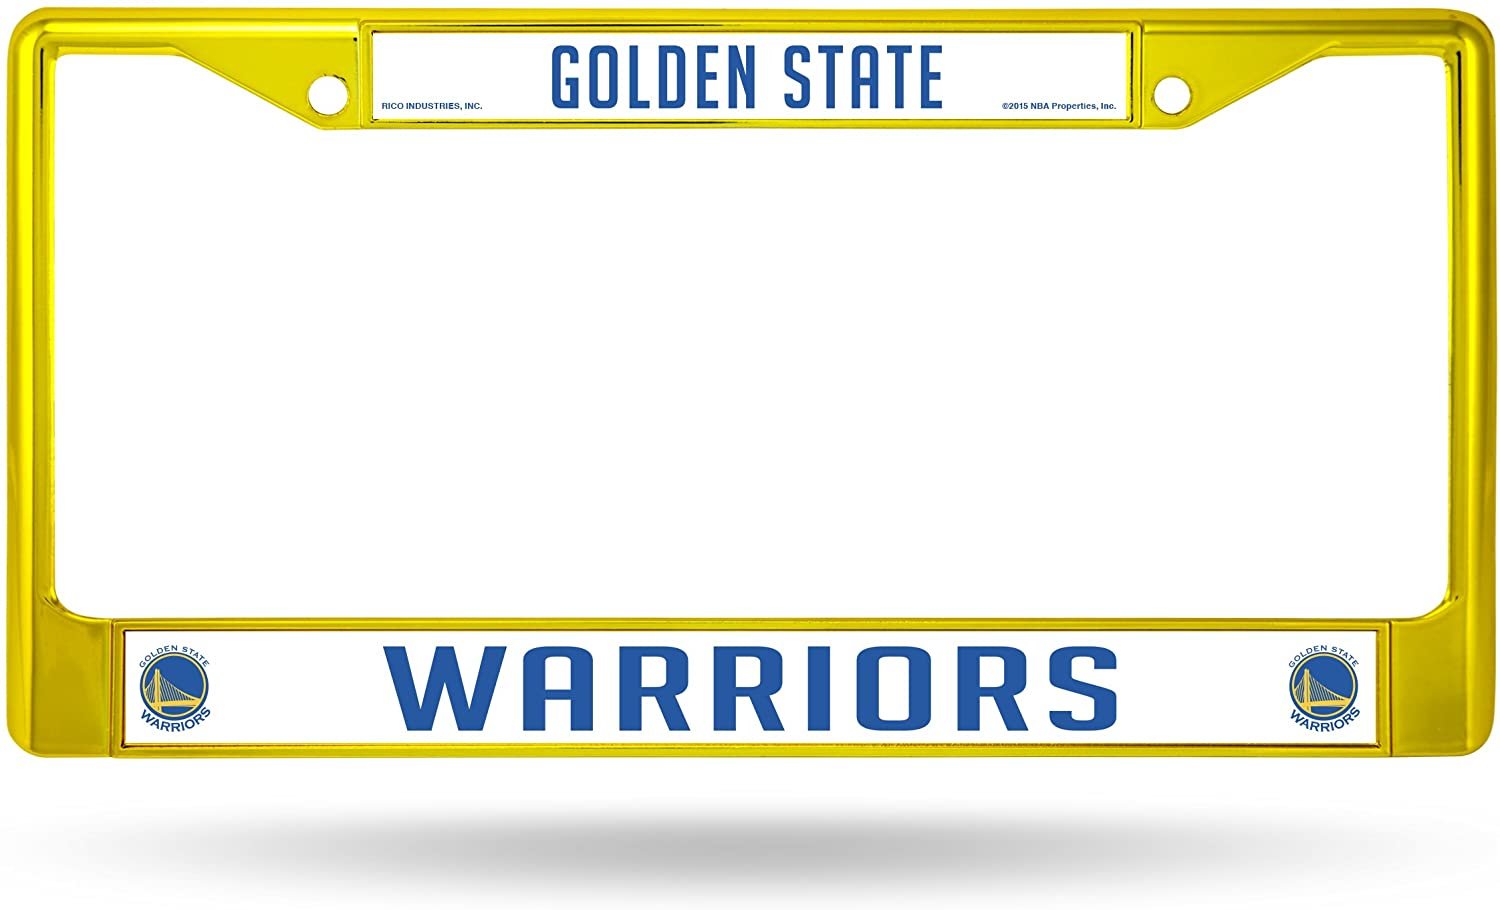 Golden State Warriors Yellow Metal License Plate Frame Chrome Tag Cover, 12x6 Inch